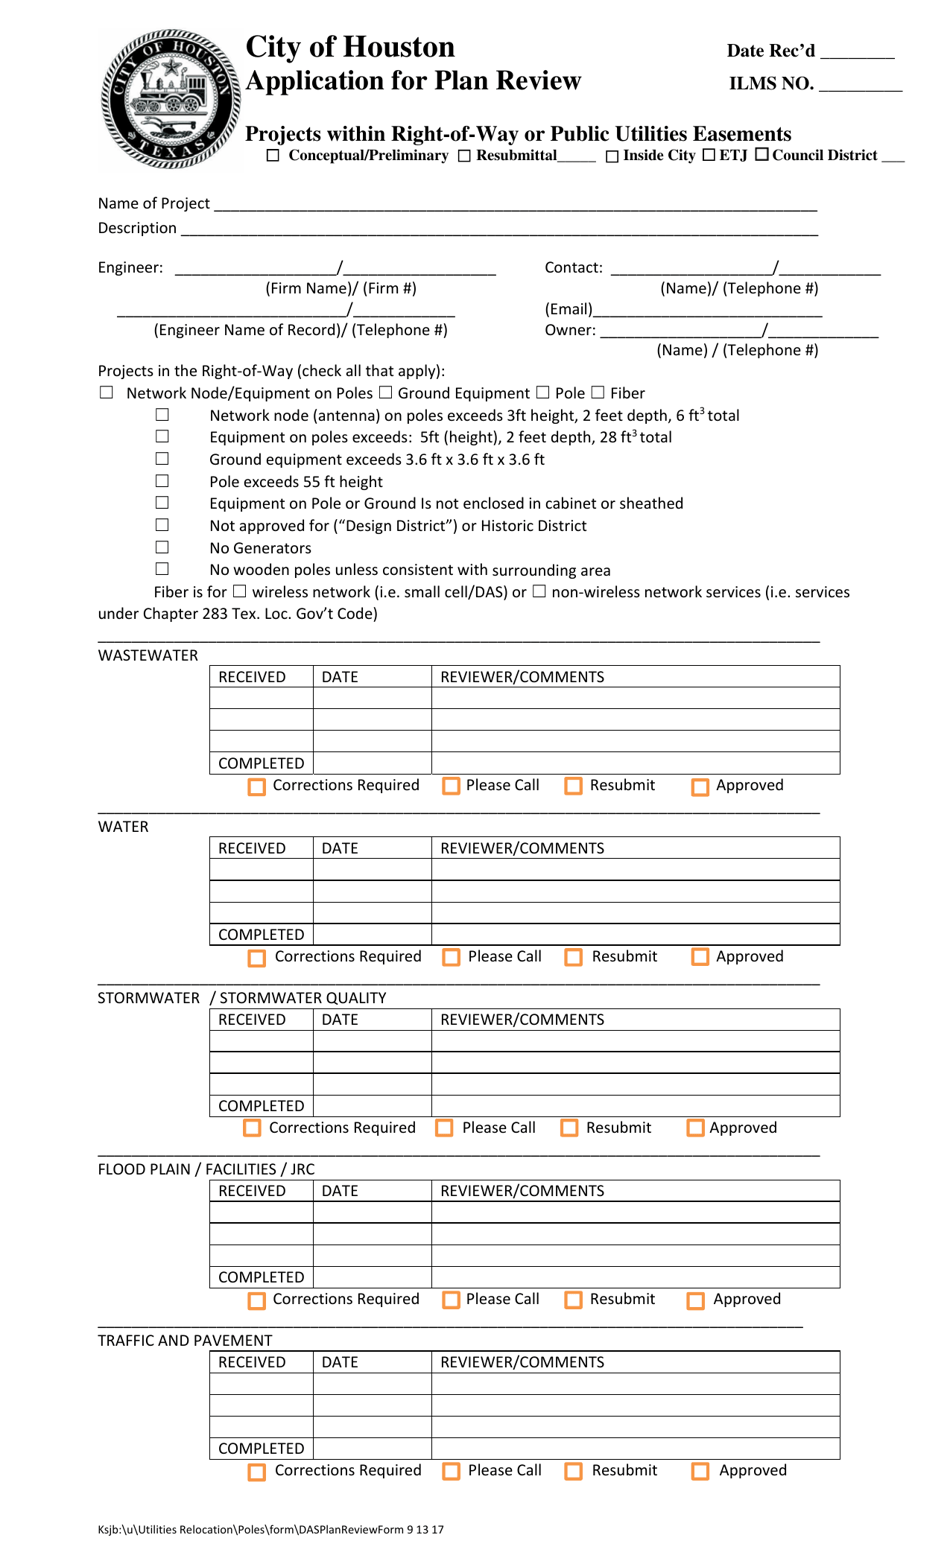 Application for Plan Review - Projects Within Right-Of-Way or Public Utilities Easements - City of Houston, Texas, Page 1